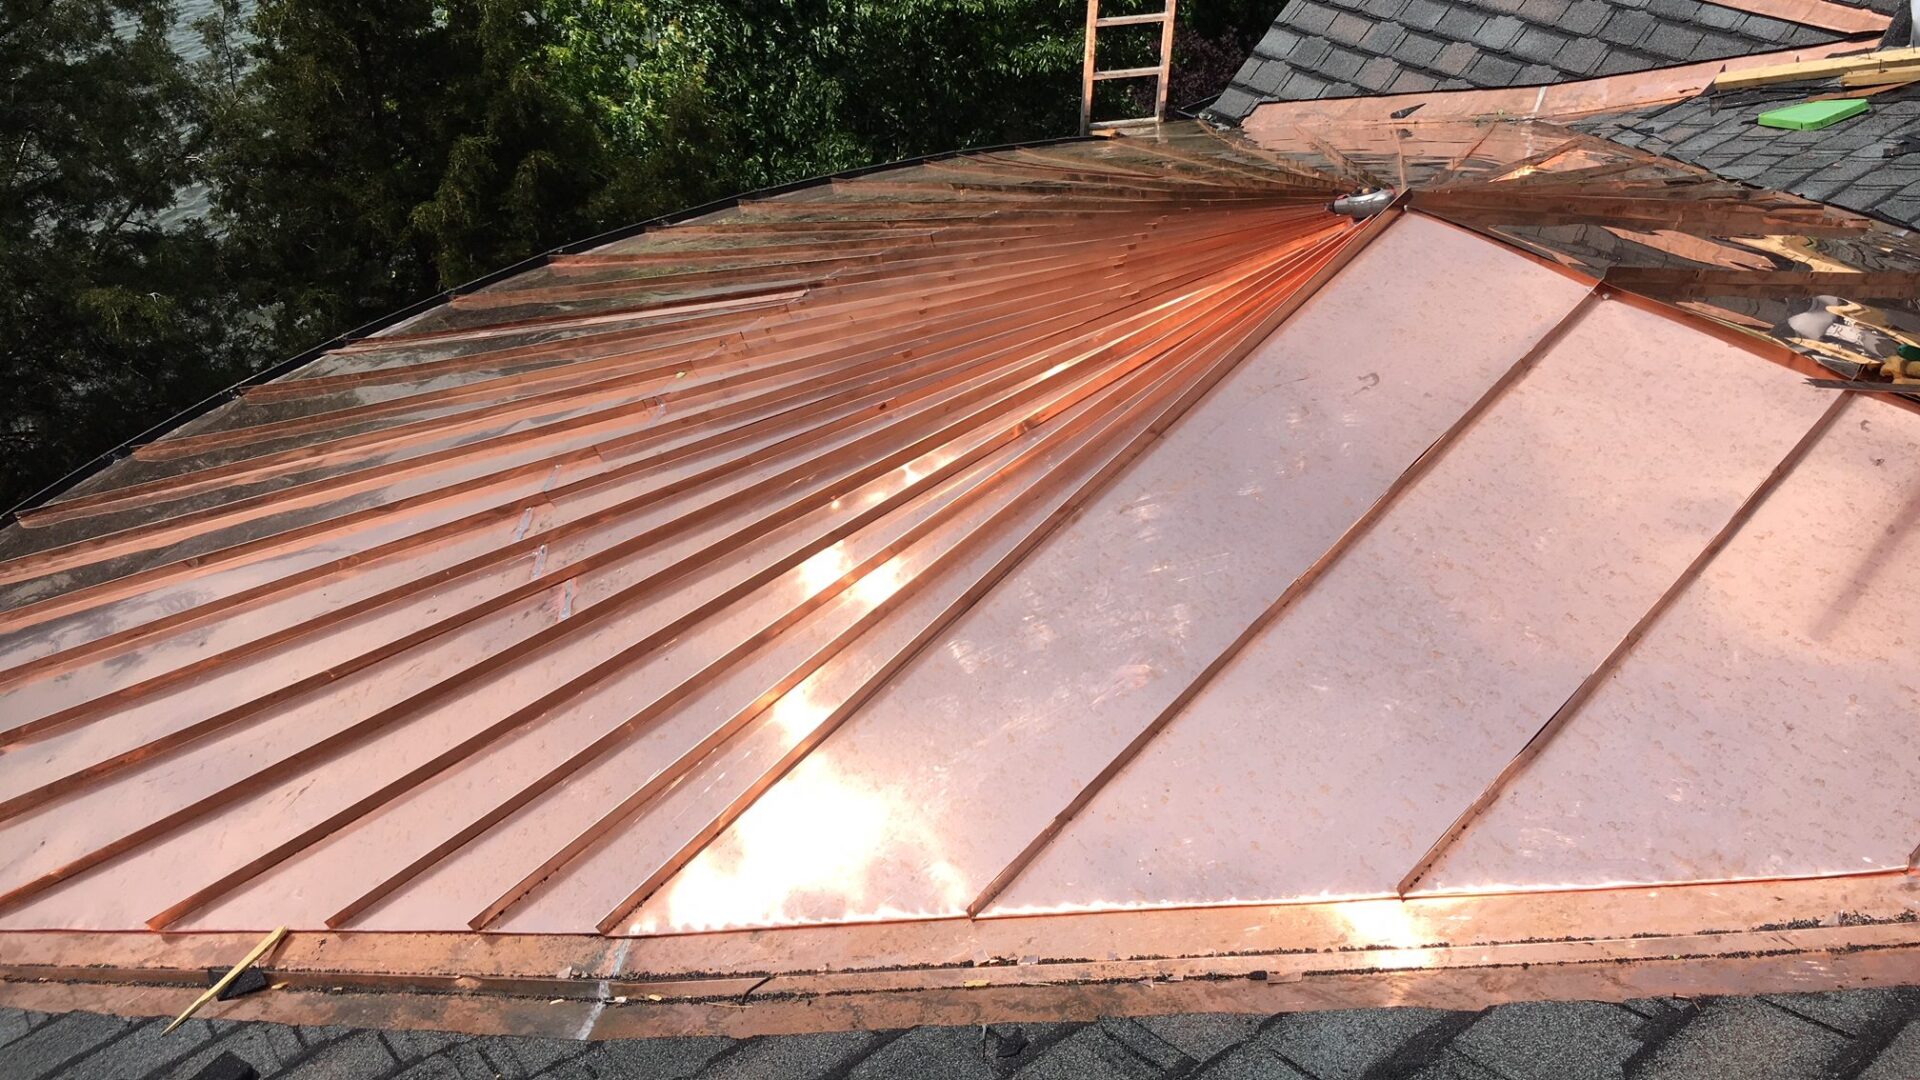 Copper Standing Seam Roofing Panels